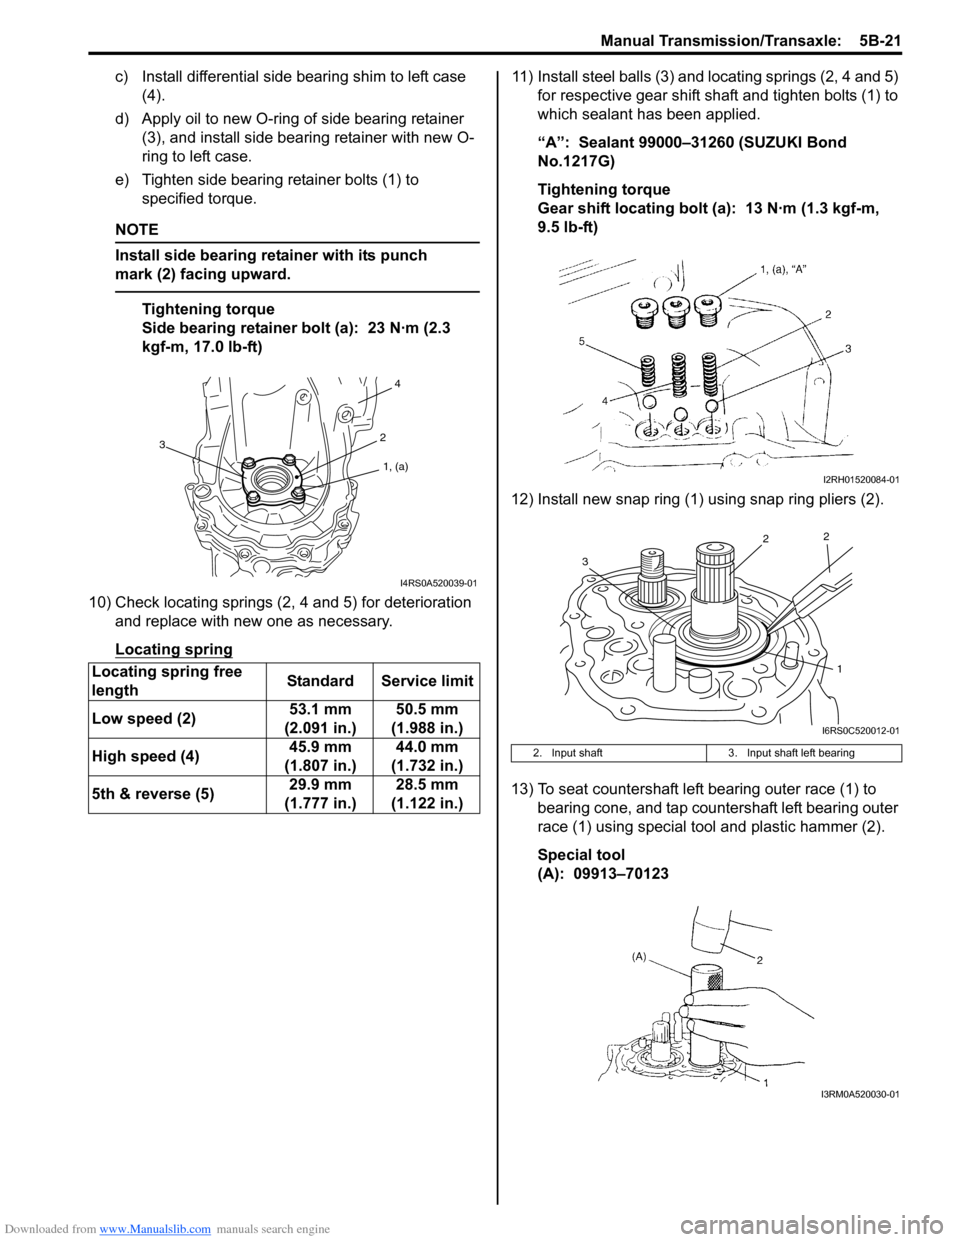 SUZUKI SWIFT 2006 2.G Service Owners Manual Downloaded from www.Manualslib.com manuals search engine Manual Transmission/Transaxle:  5B-21
c) Install differential side bearing shim to left case (4).
d) Apply oil to new O-ring of side bearing re